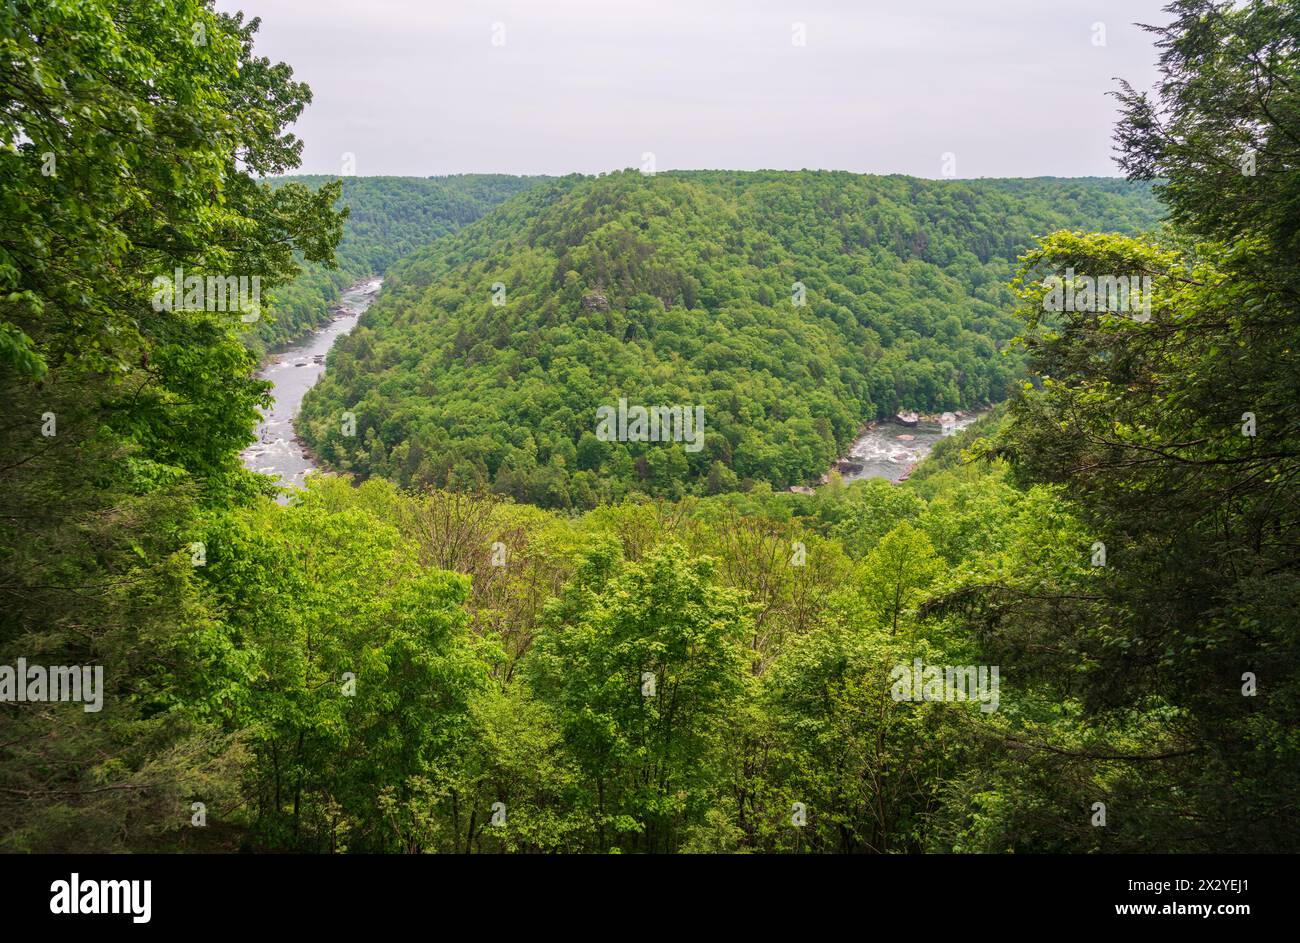 The Carnifex Ferry State Park, American Civil War battle site in West Virginia, USA Stock Photo